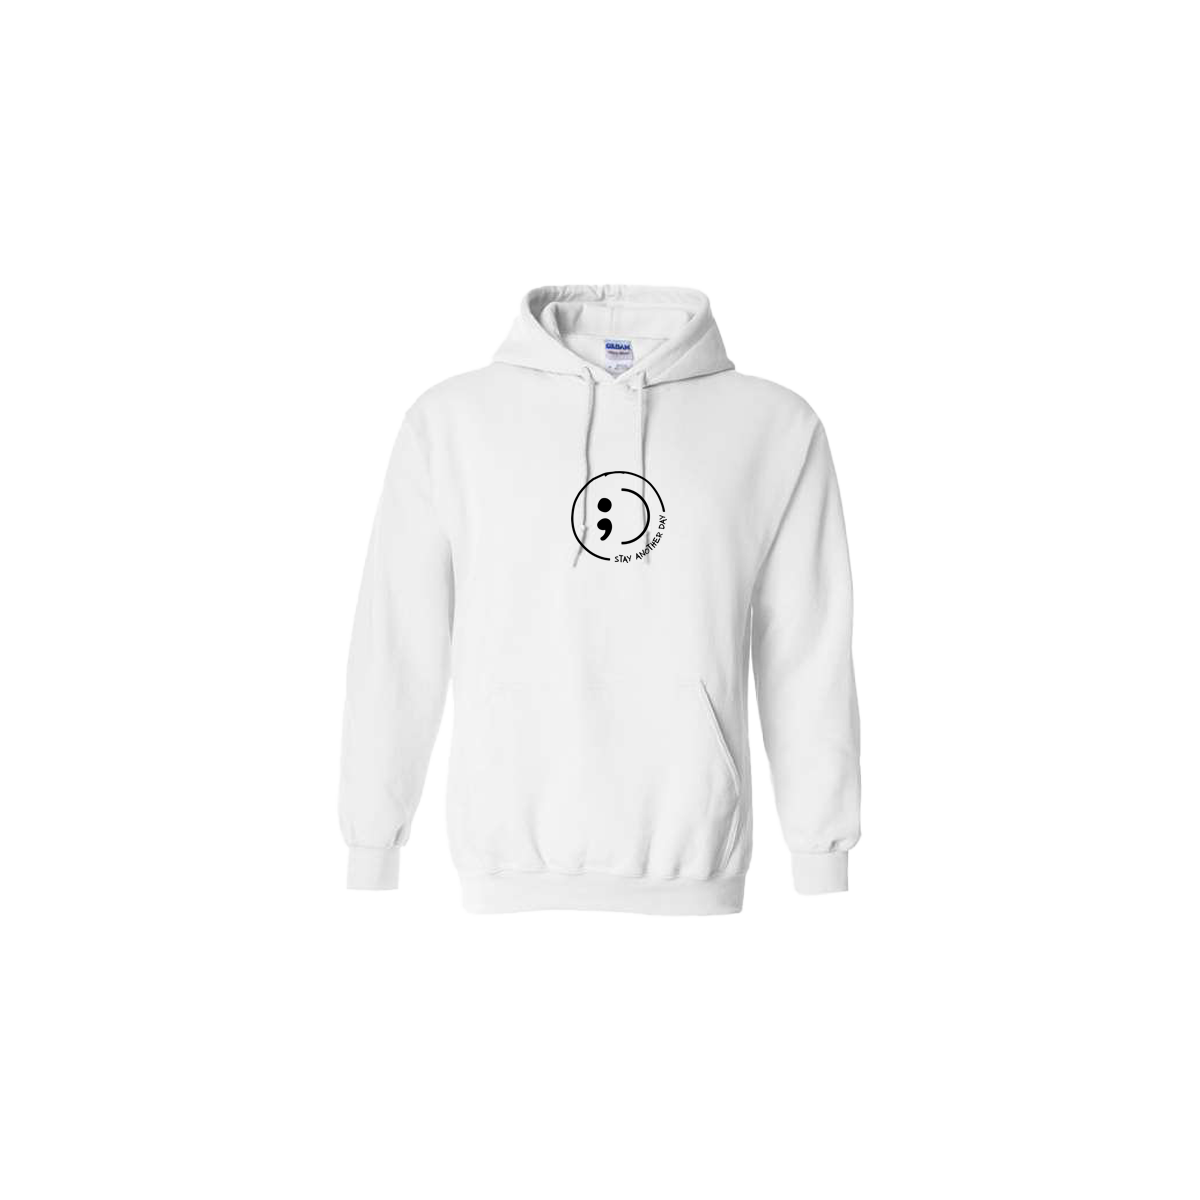 Stay Another Day Smiley with text Embroidered White Hoodie - Mental Health Awareness Clothing